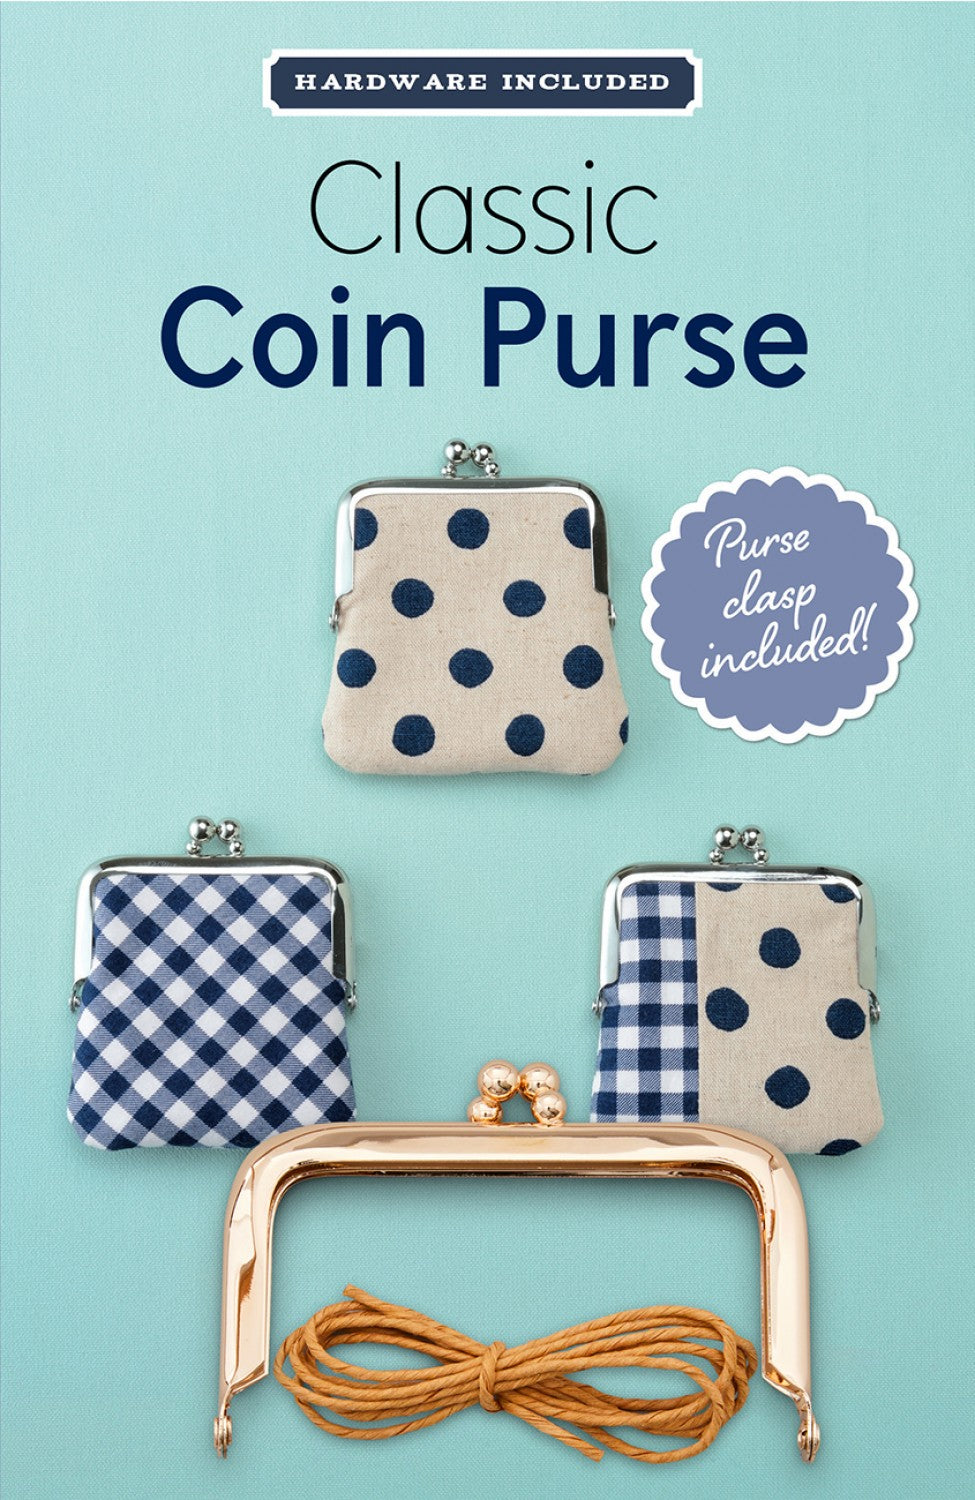 Classic Coin Purse Pattern Including Hardware